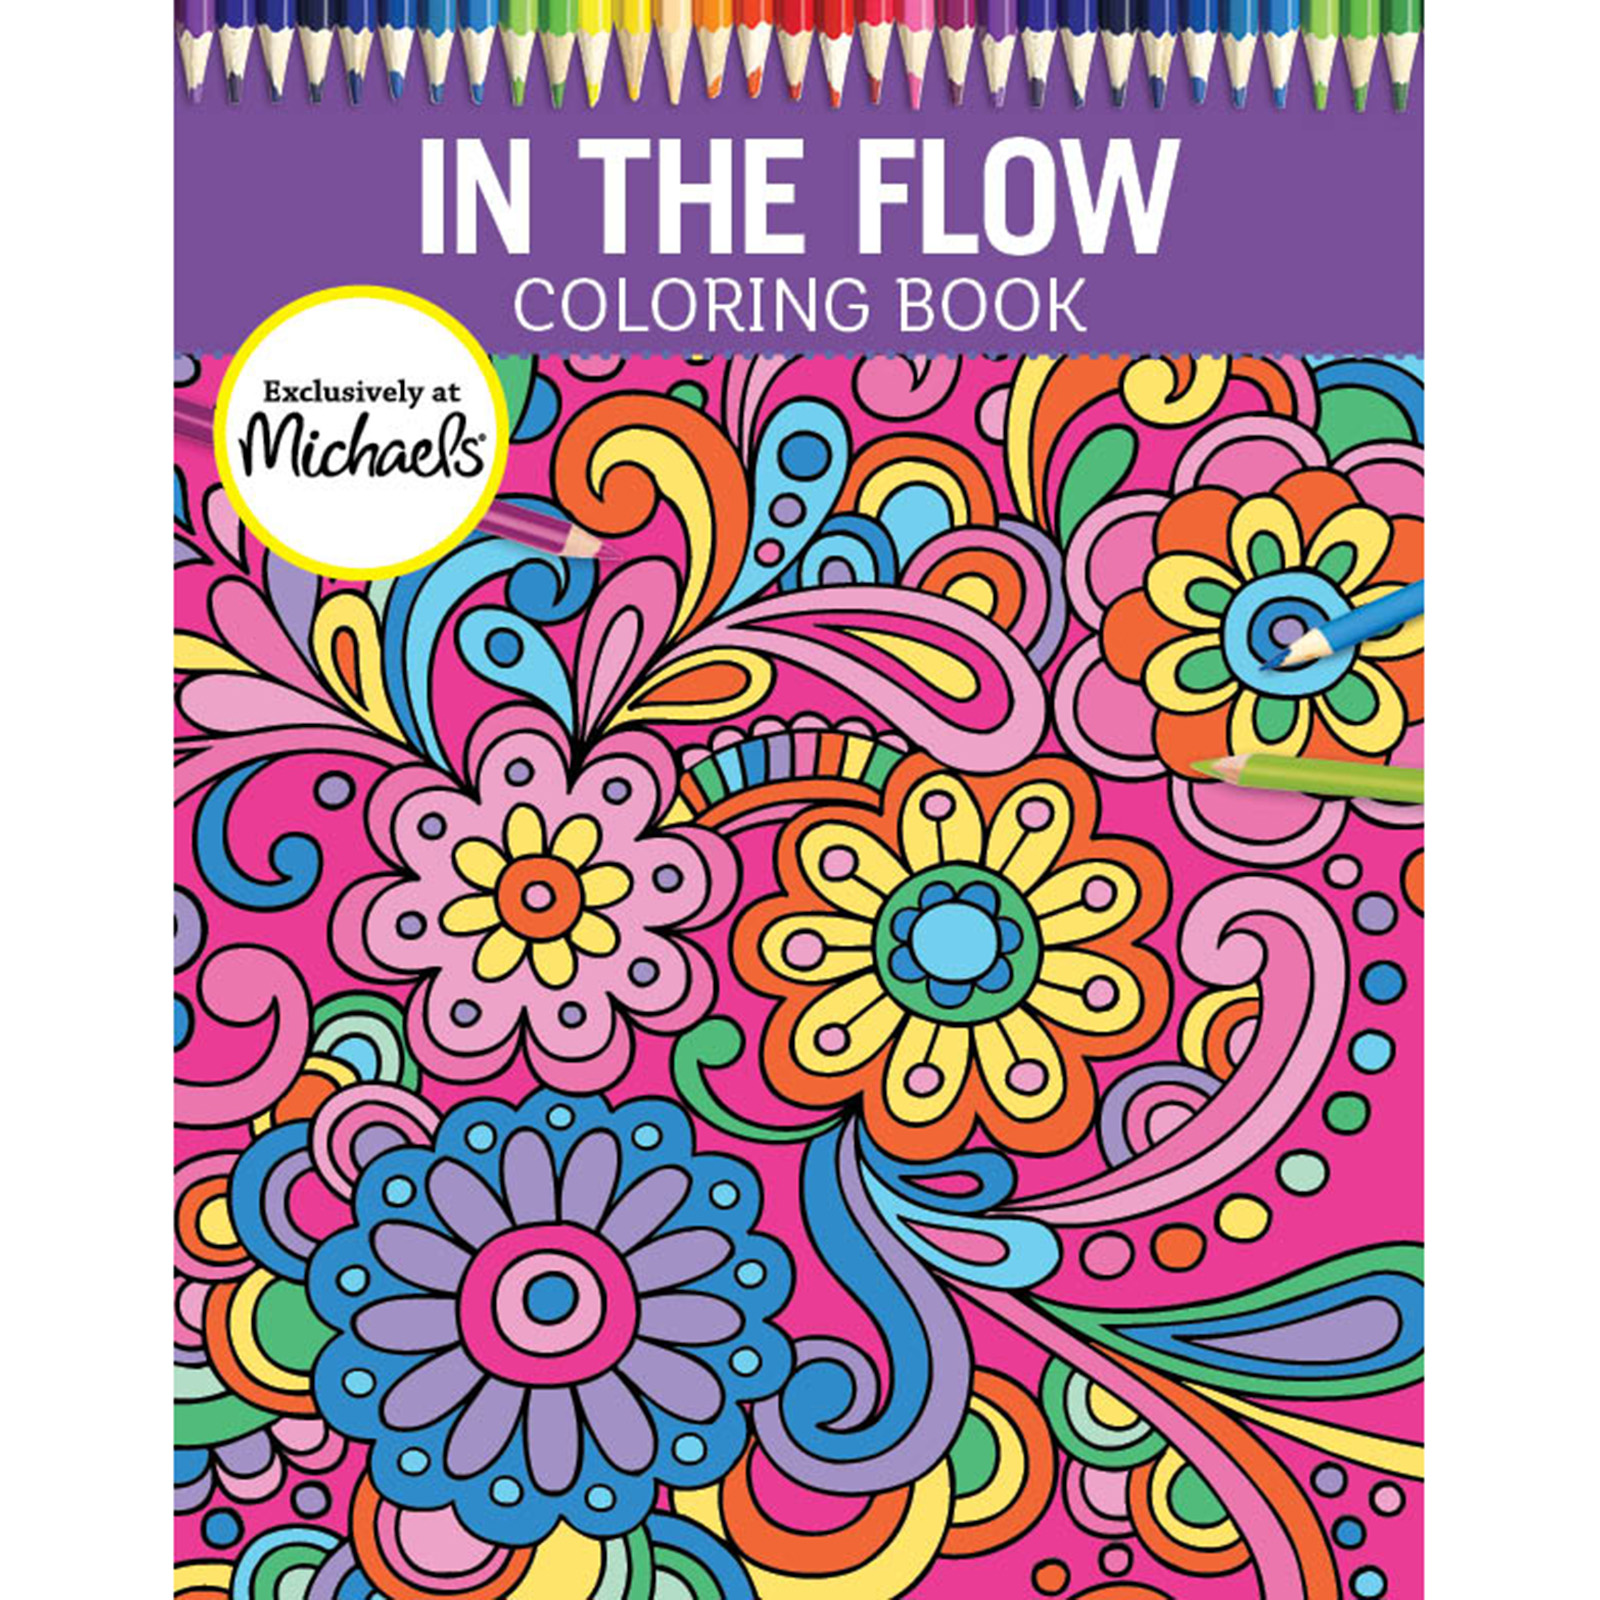 In the Flow Coloring Book